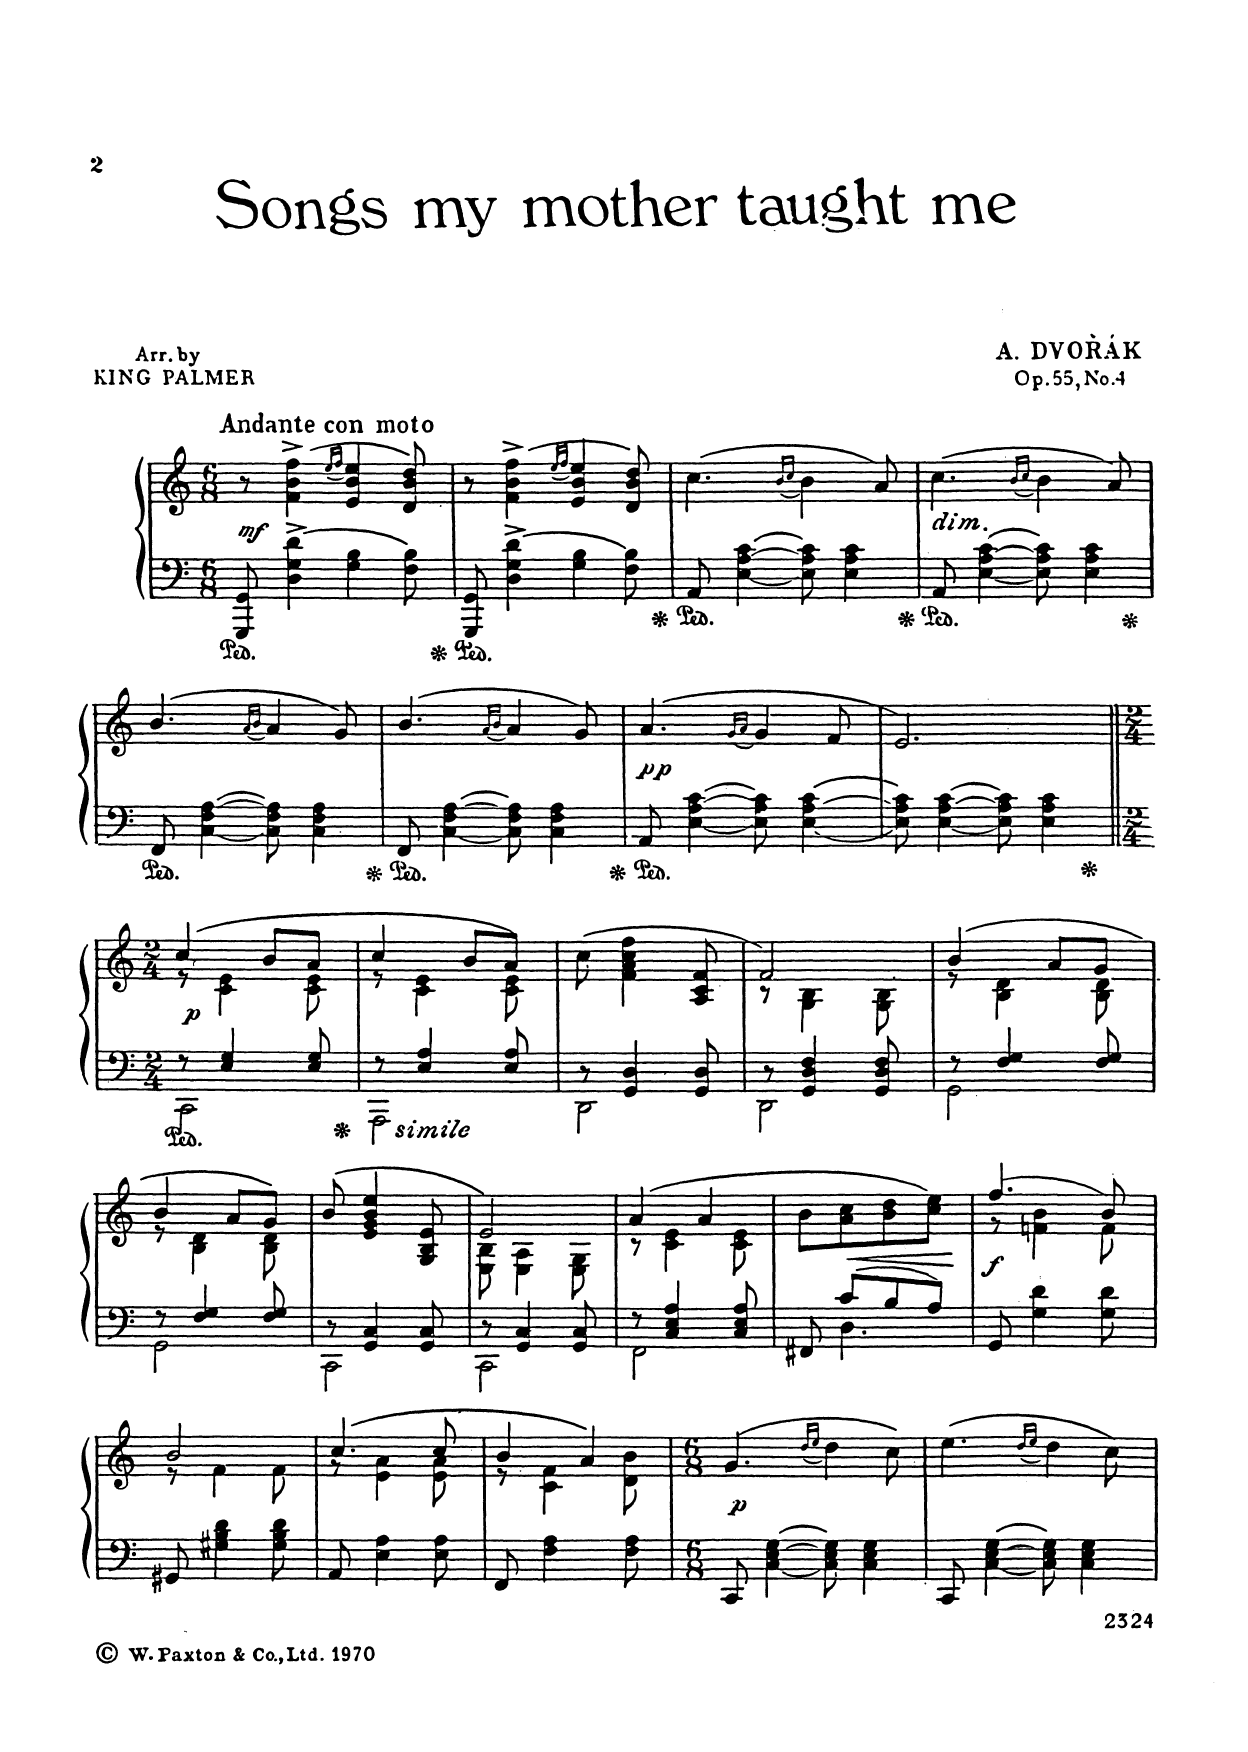 Download Antonín Dvorák Songs My Mother Taught Me sheet music and printable PDF score & Classical music notes